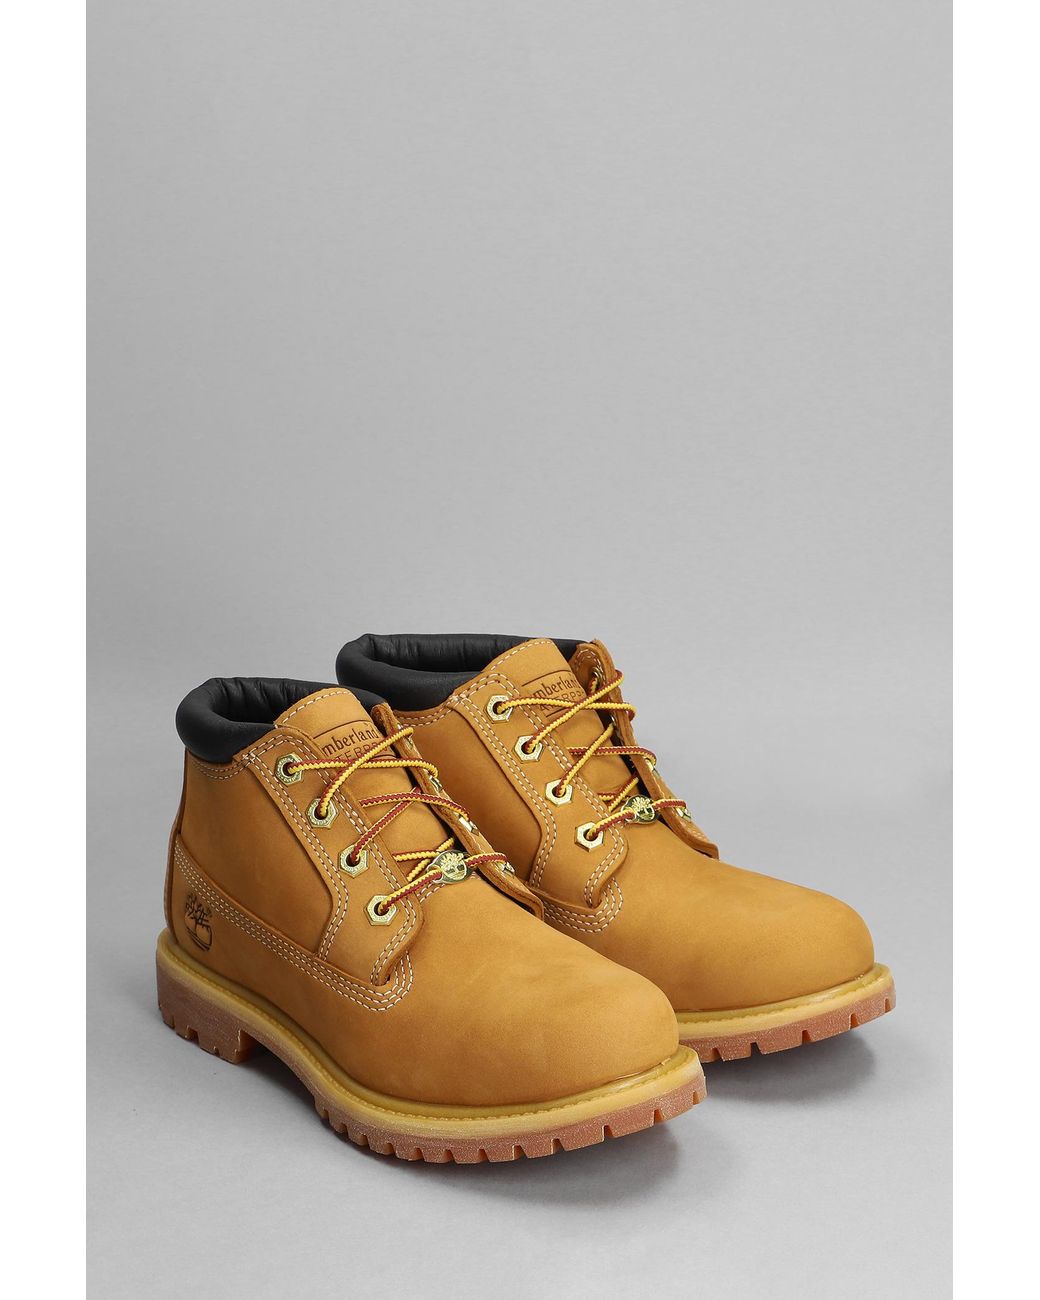 Timberland Nellie Chukka Combat Boots In Beige Nubuck in Natural | Lyst